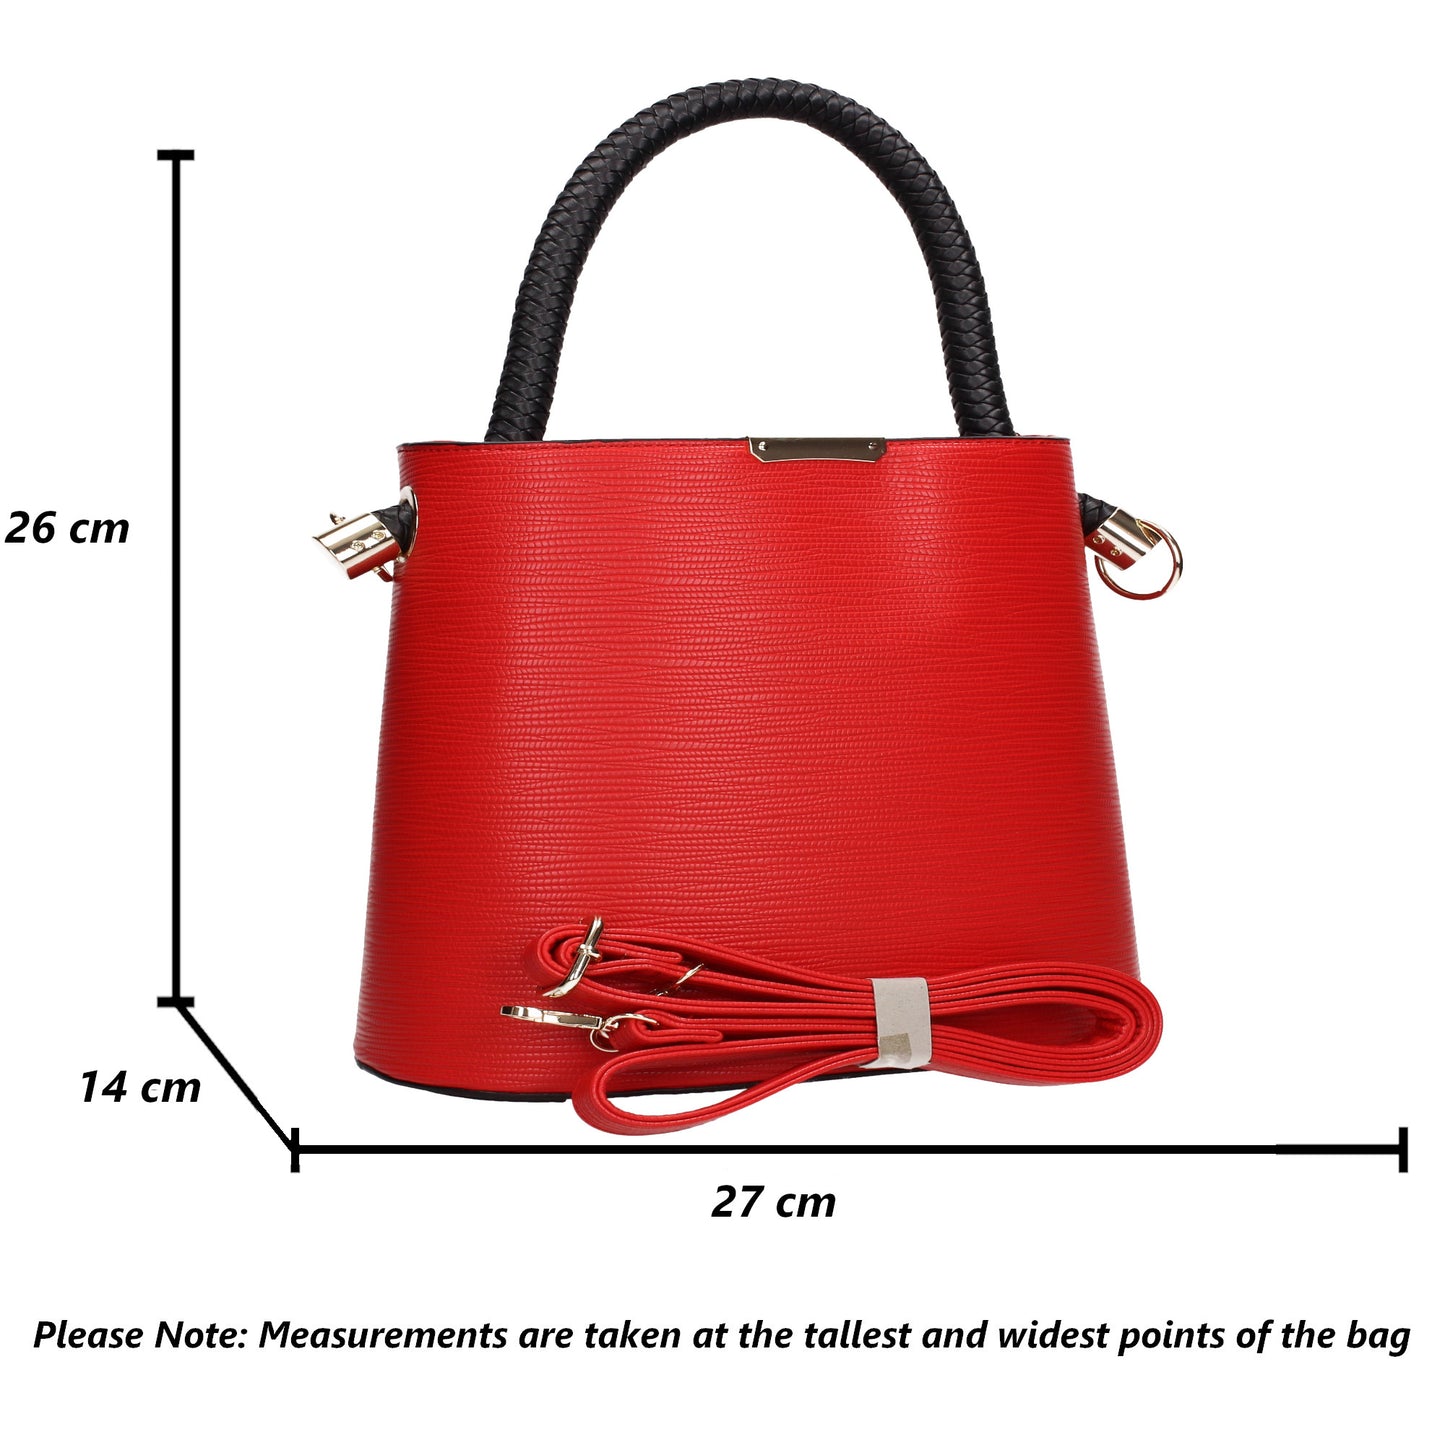 Buy your Eden Handbag Red Today! Buy with confidence from Swankyswans